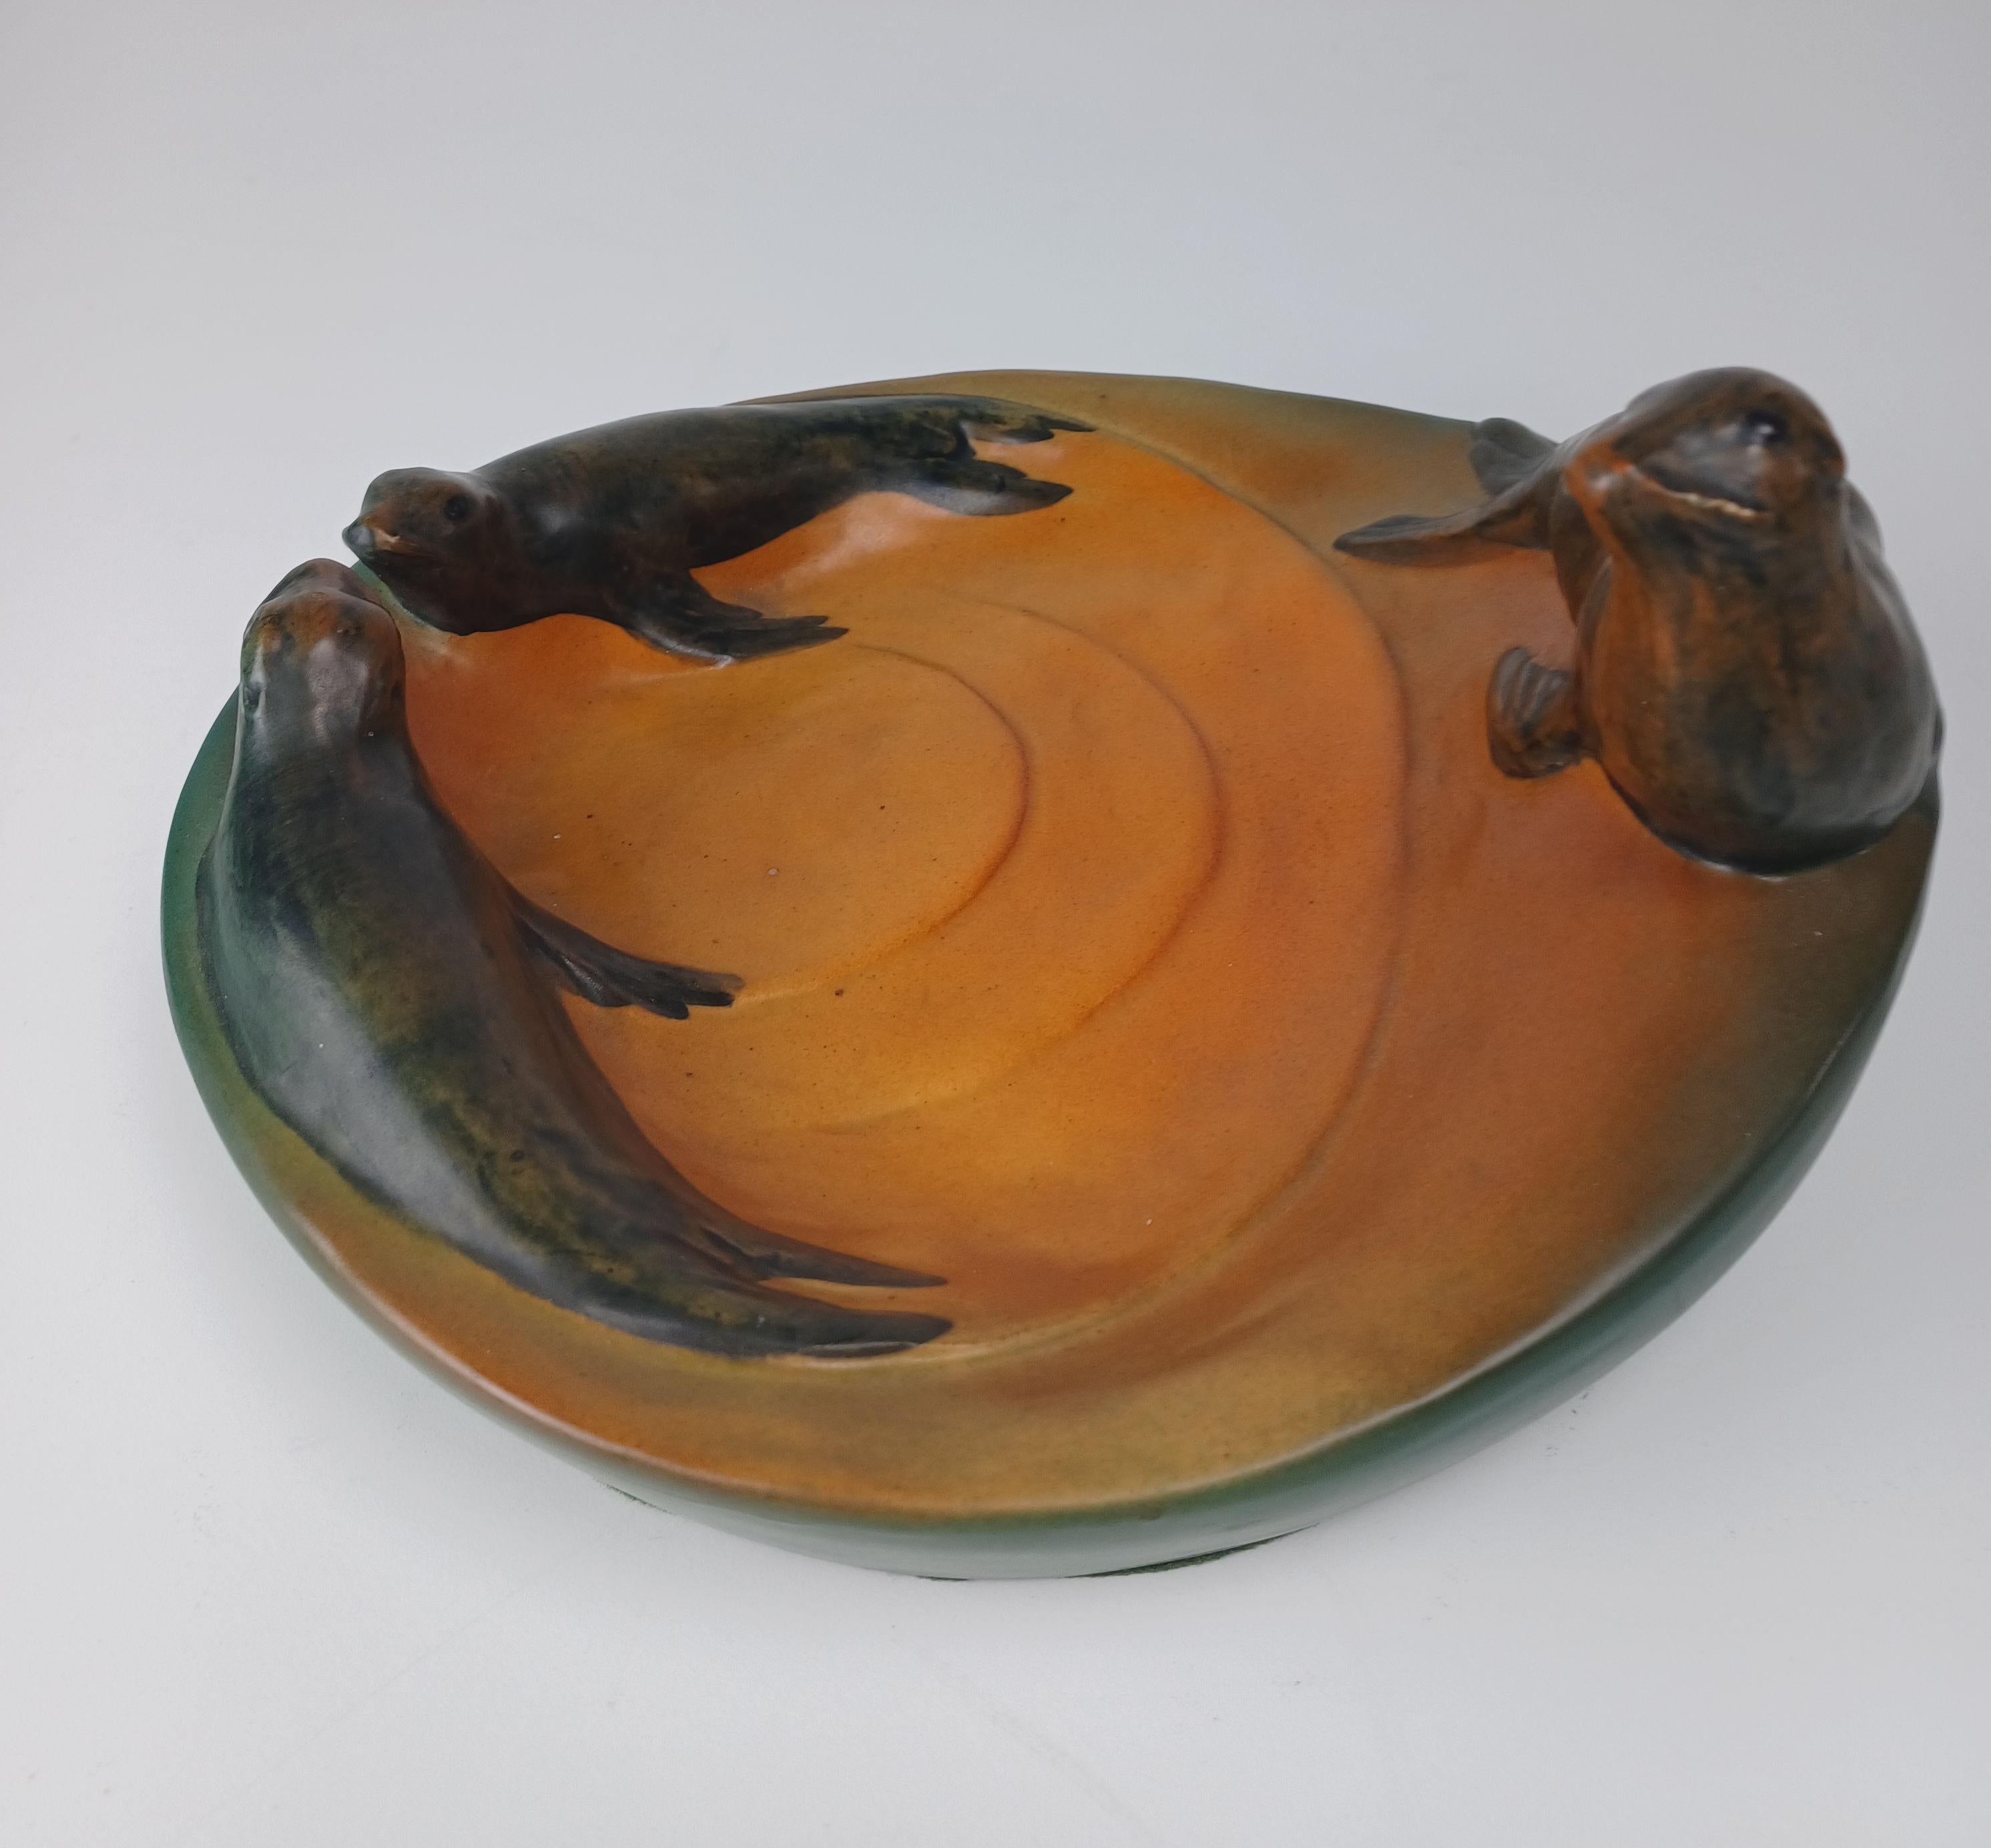 1910's Danish Art Nouveau Handcrafted Sealion Bowl - Ash Tray by P. Ipsens Enke In Good Condition For Sale In Knebel, DK